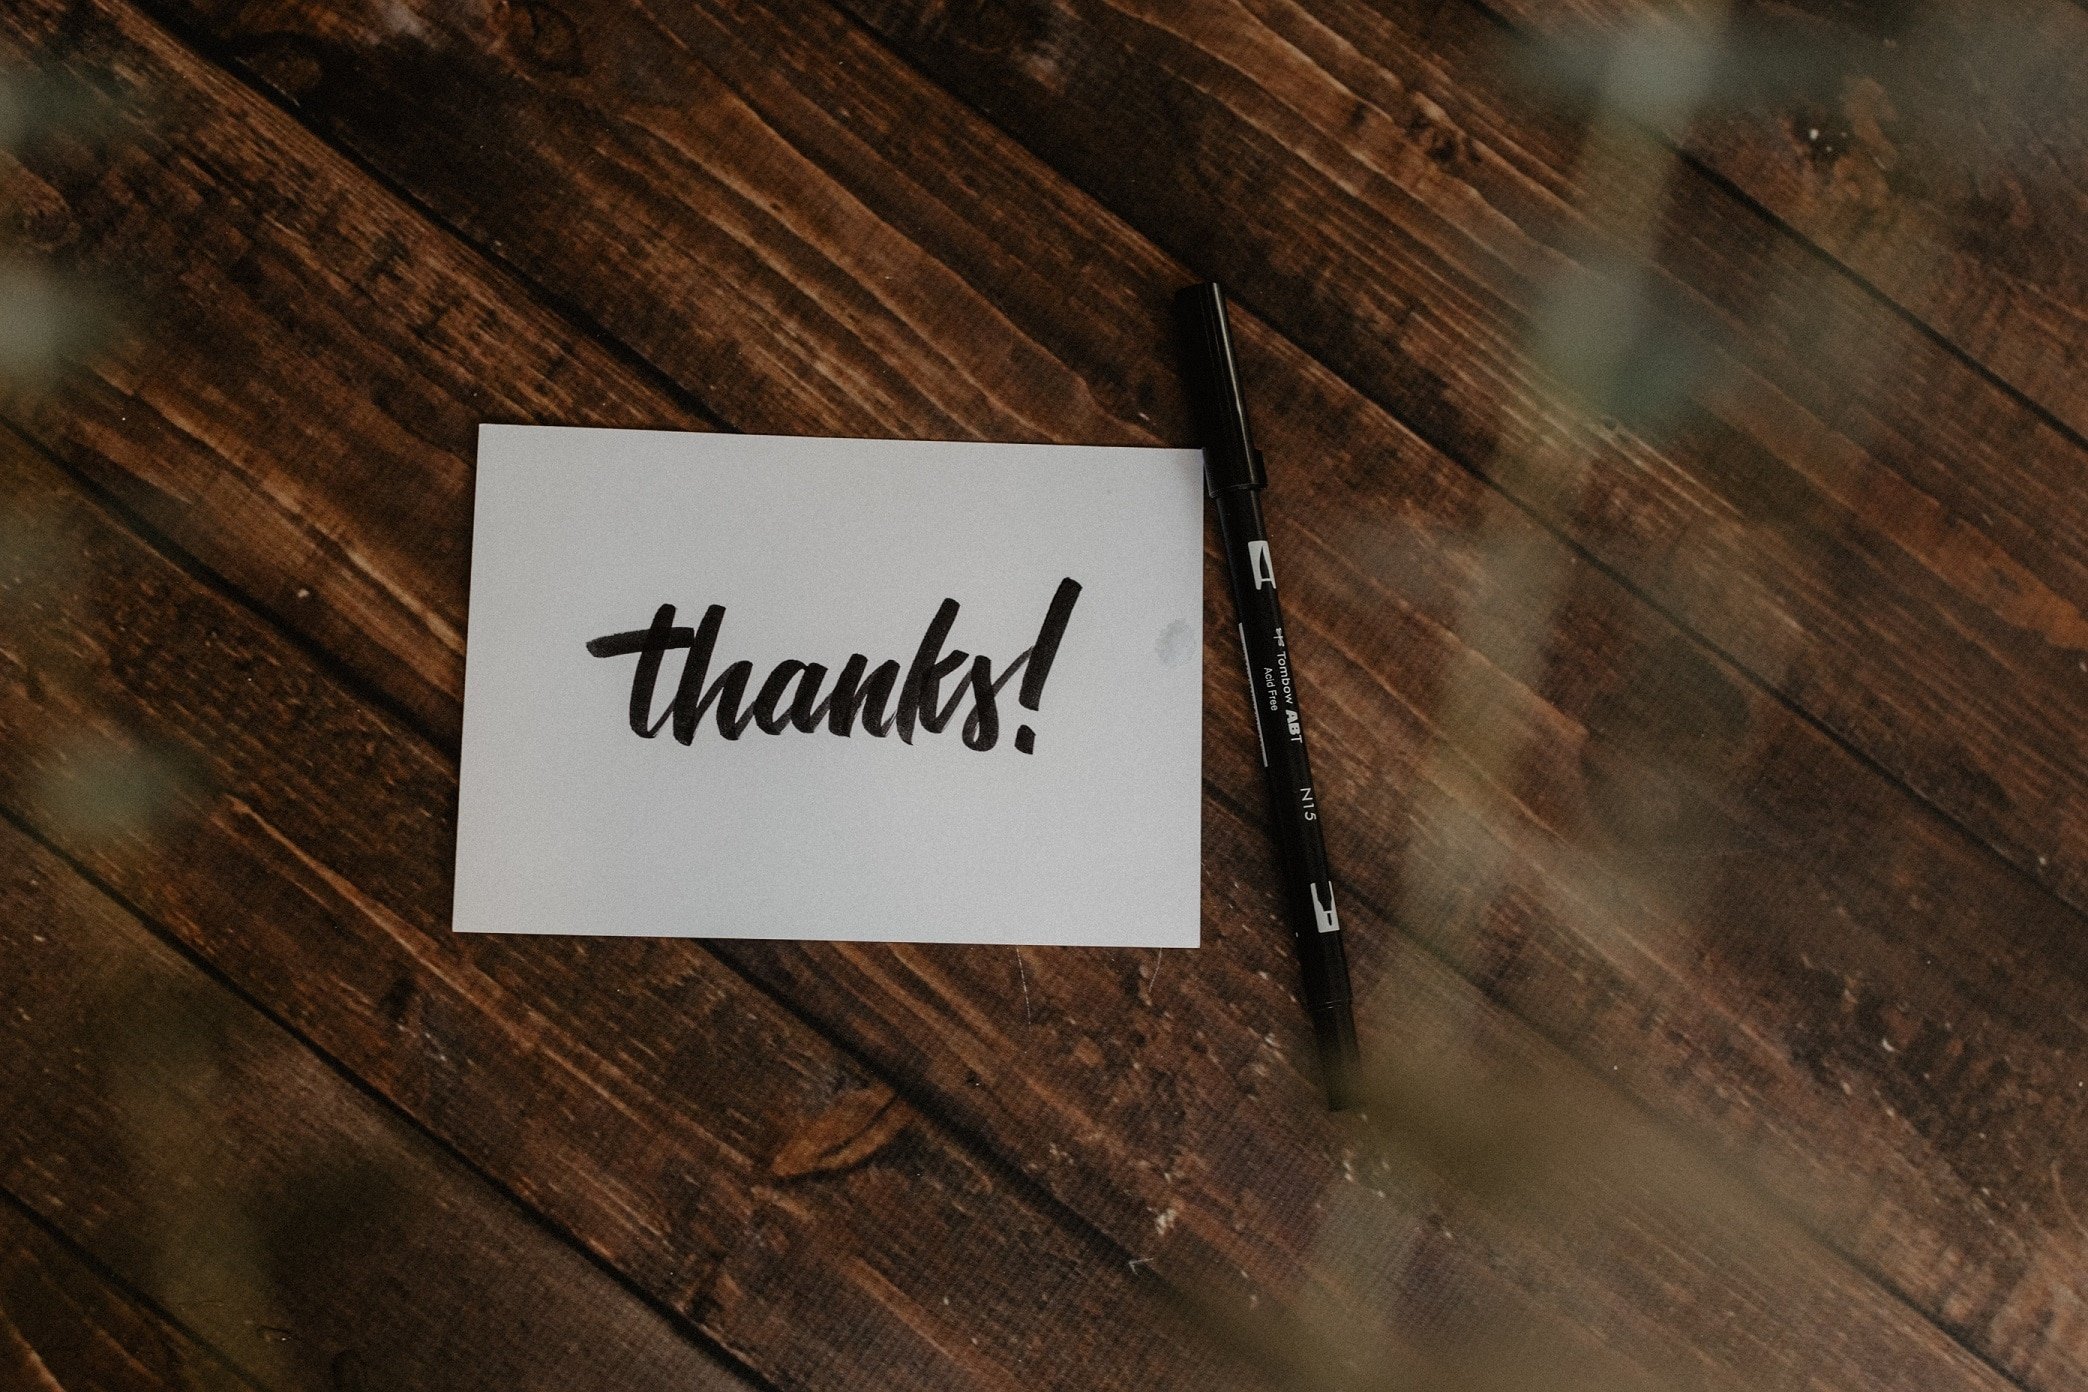 Volunteer Appreciation: A Guide to Thanking Your Volunteers